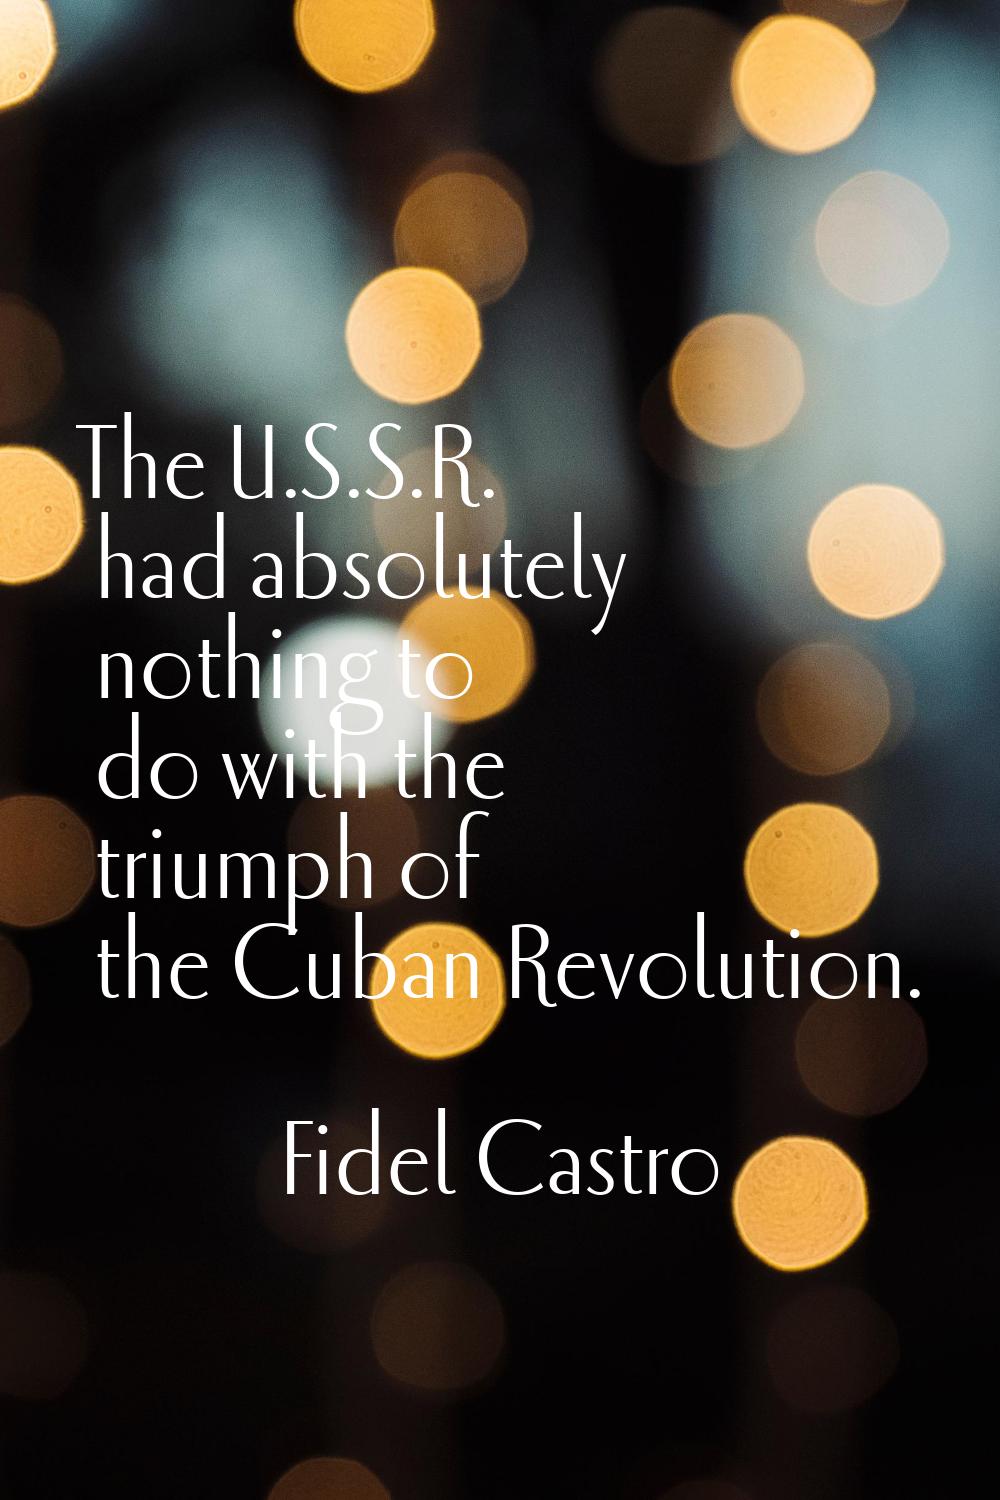 The U.S.S.R. had absolutely nothing to do with the triumph of the Cuban Revolution.